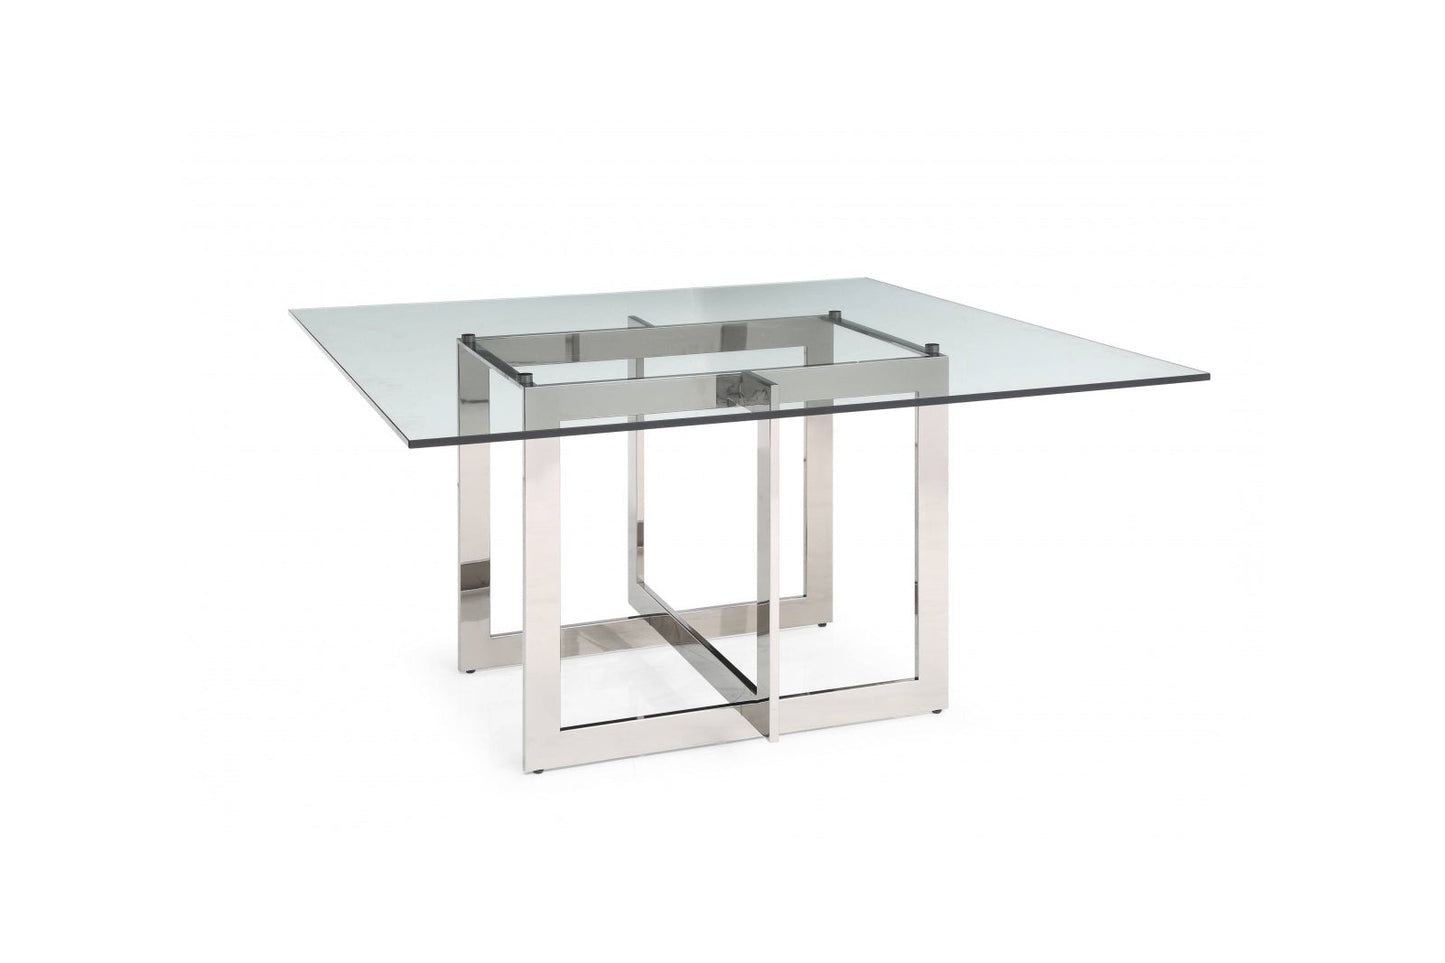 Modrest Keaton - Square Modern Glass + Stainless Steel Dining Table